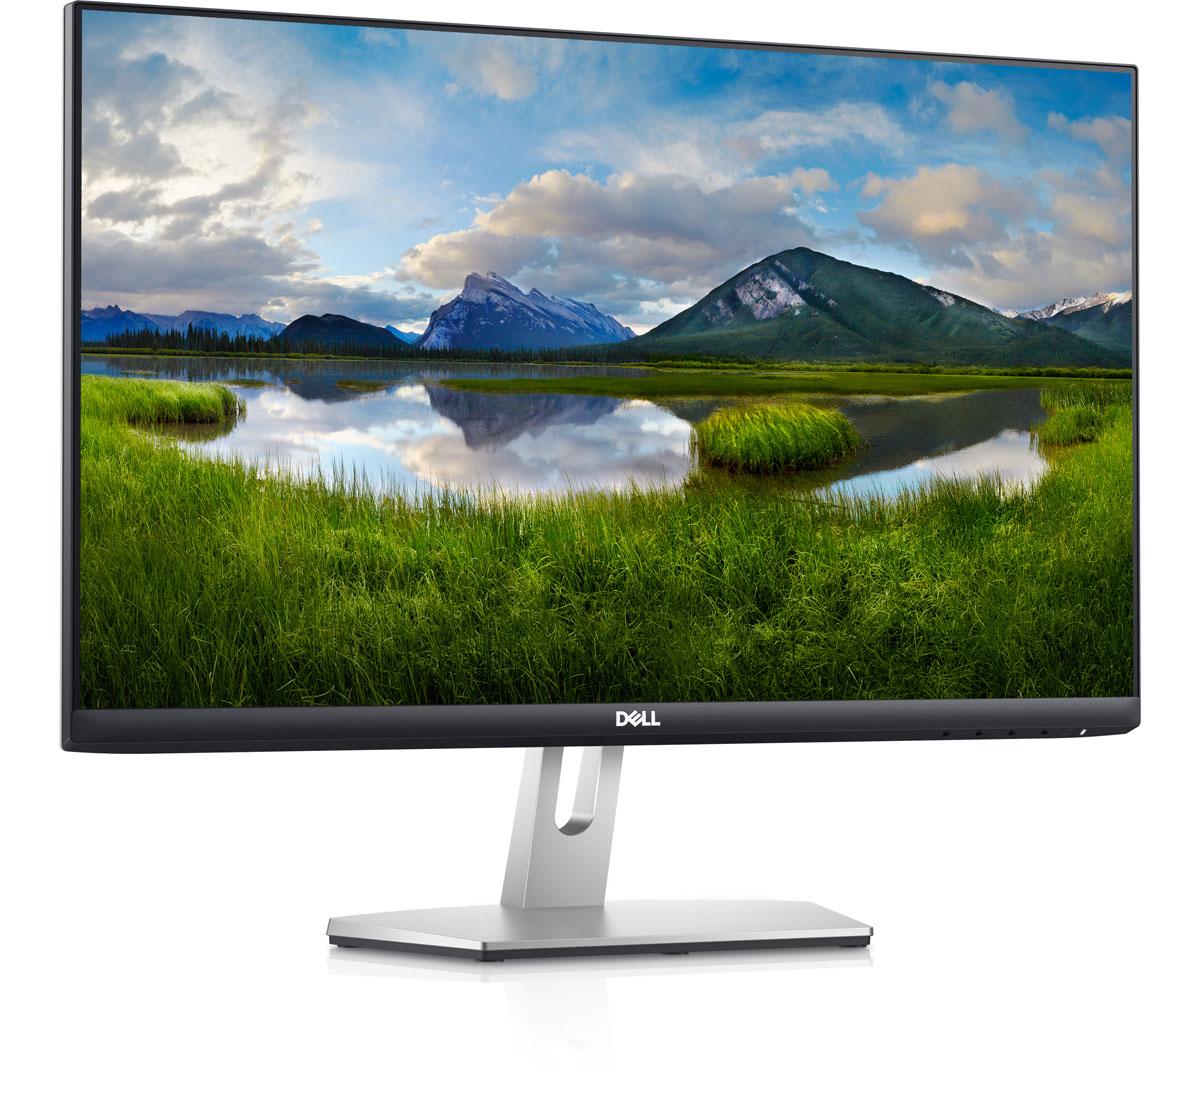 Dell 24in S2421HN IPS Monitor for $94.99 Shipped